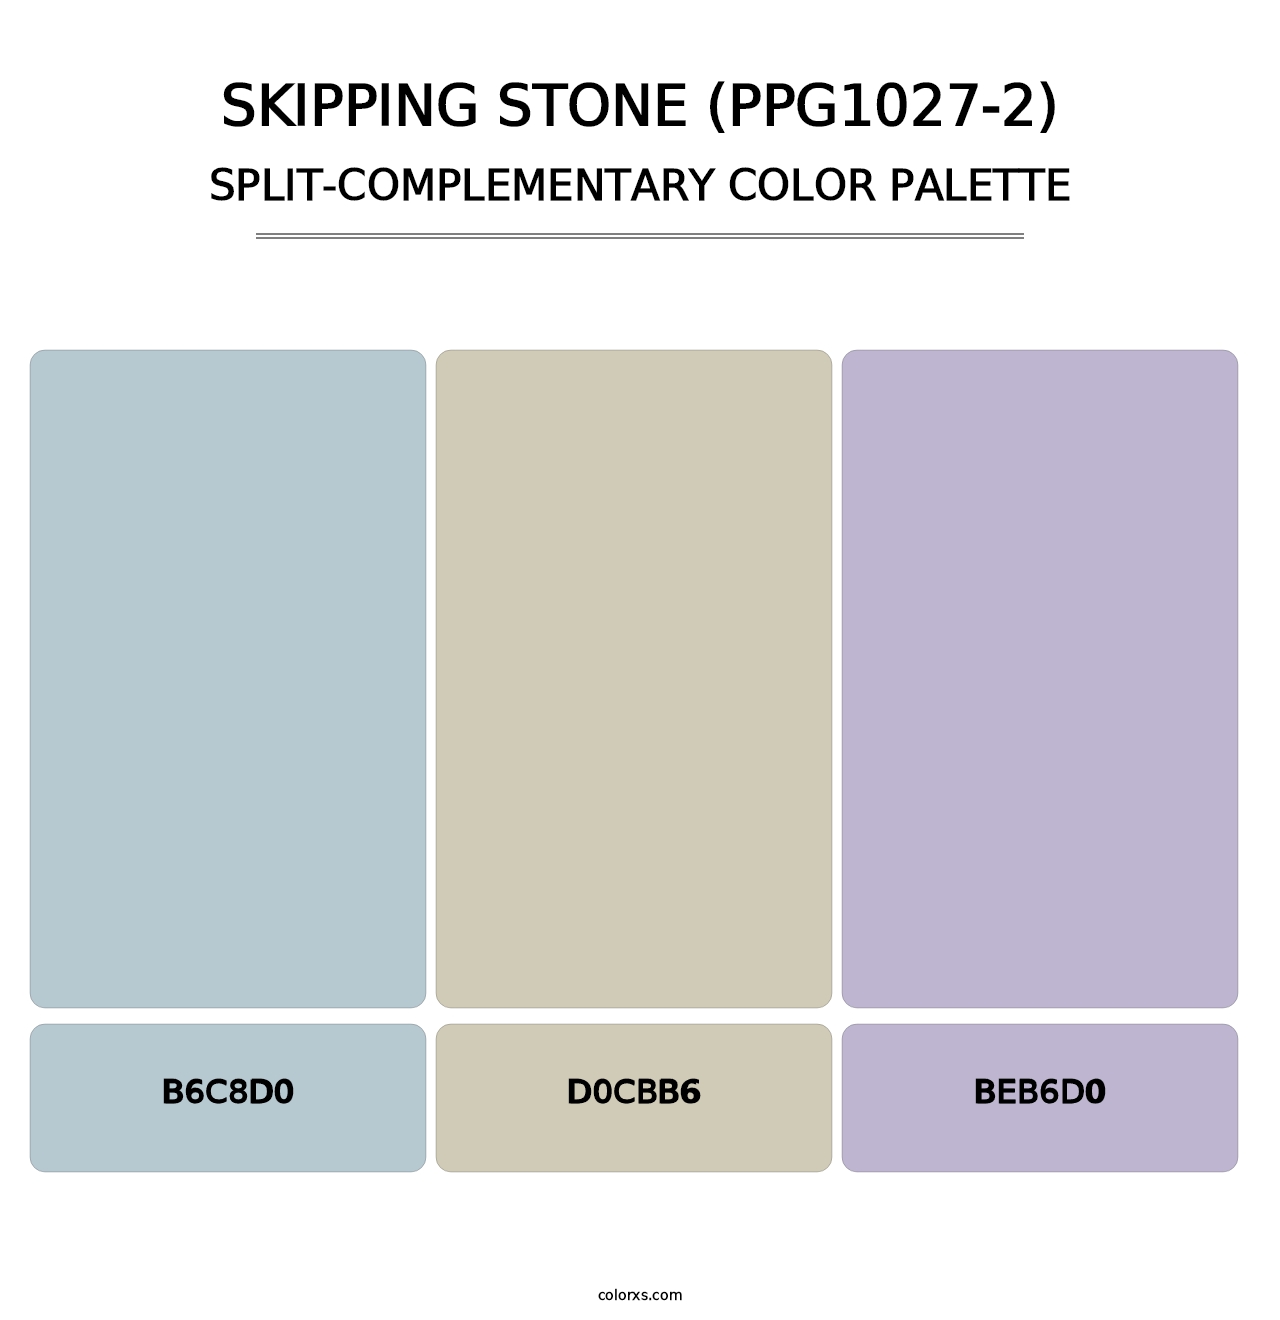 Skipping Stone (PPG1027-2) - Split-Complementary Color Palette